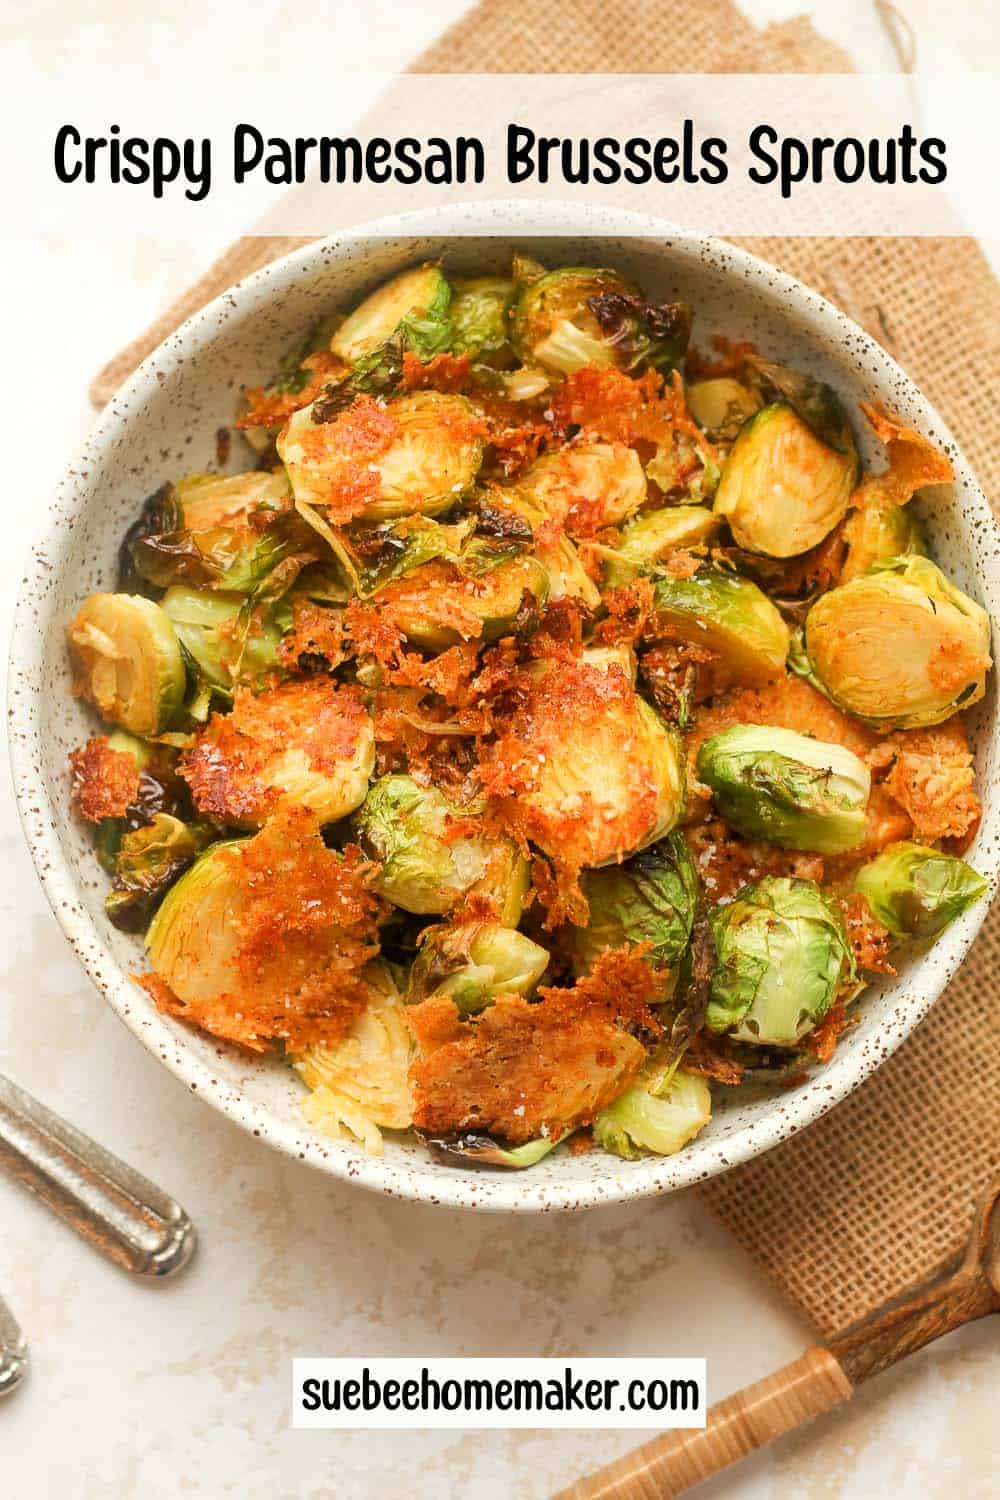 A bowl of brussels sprouts with parmesan cheese.